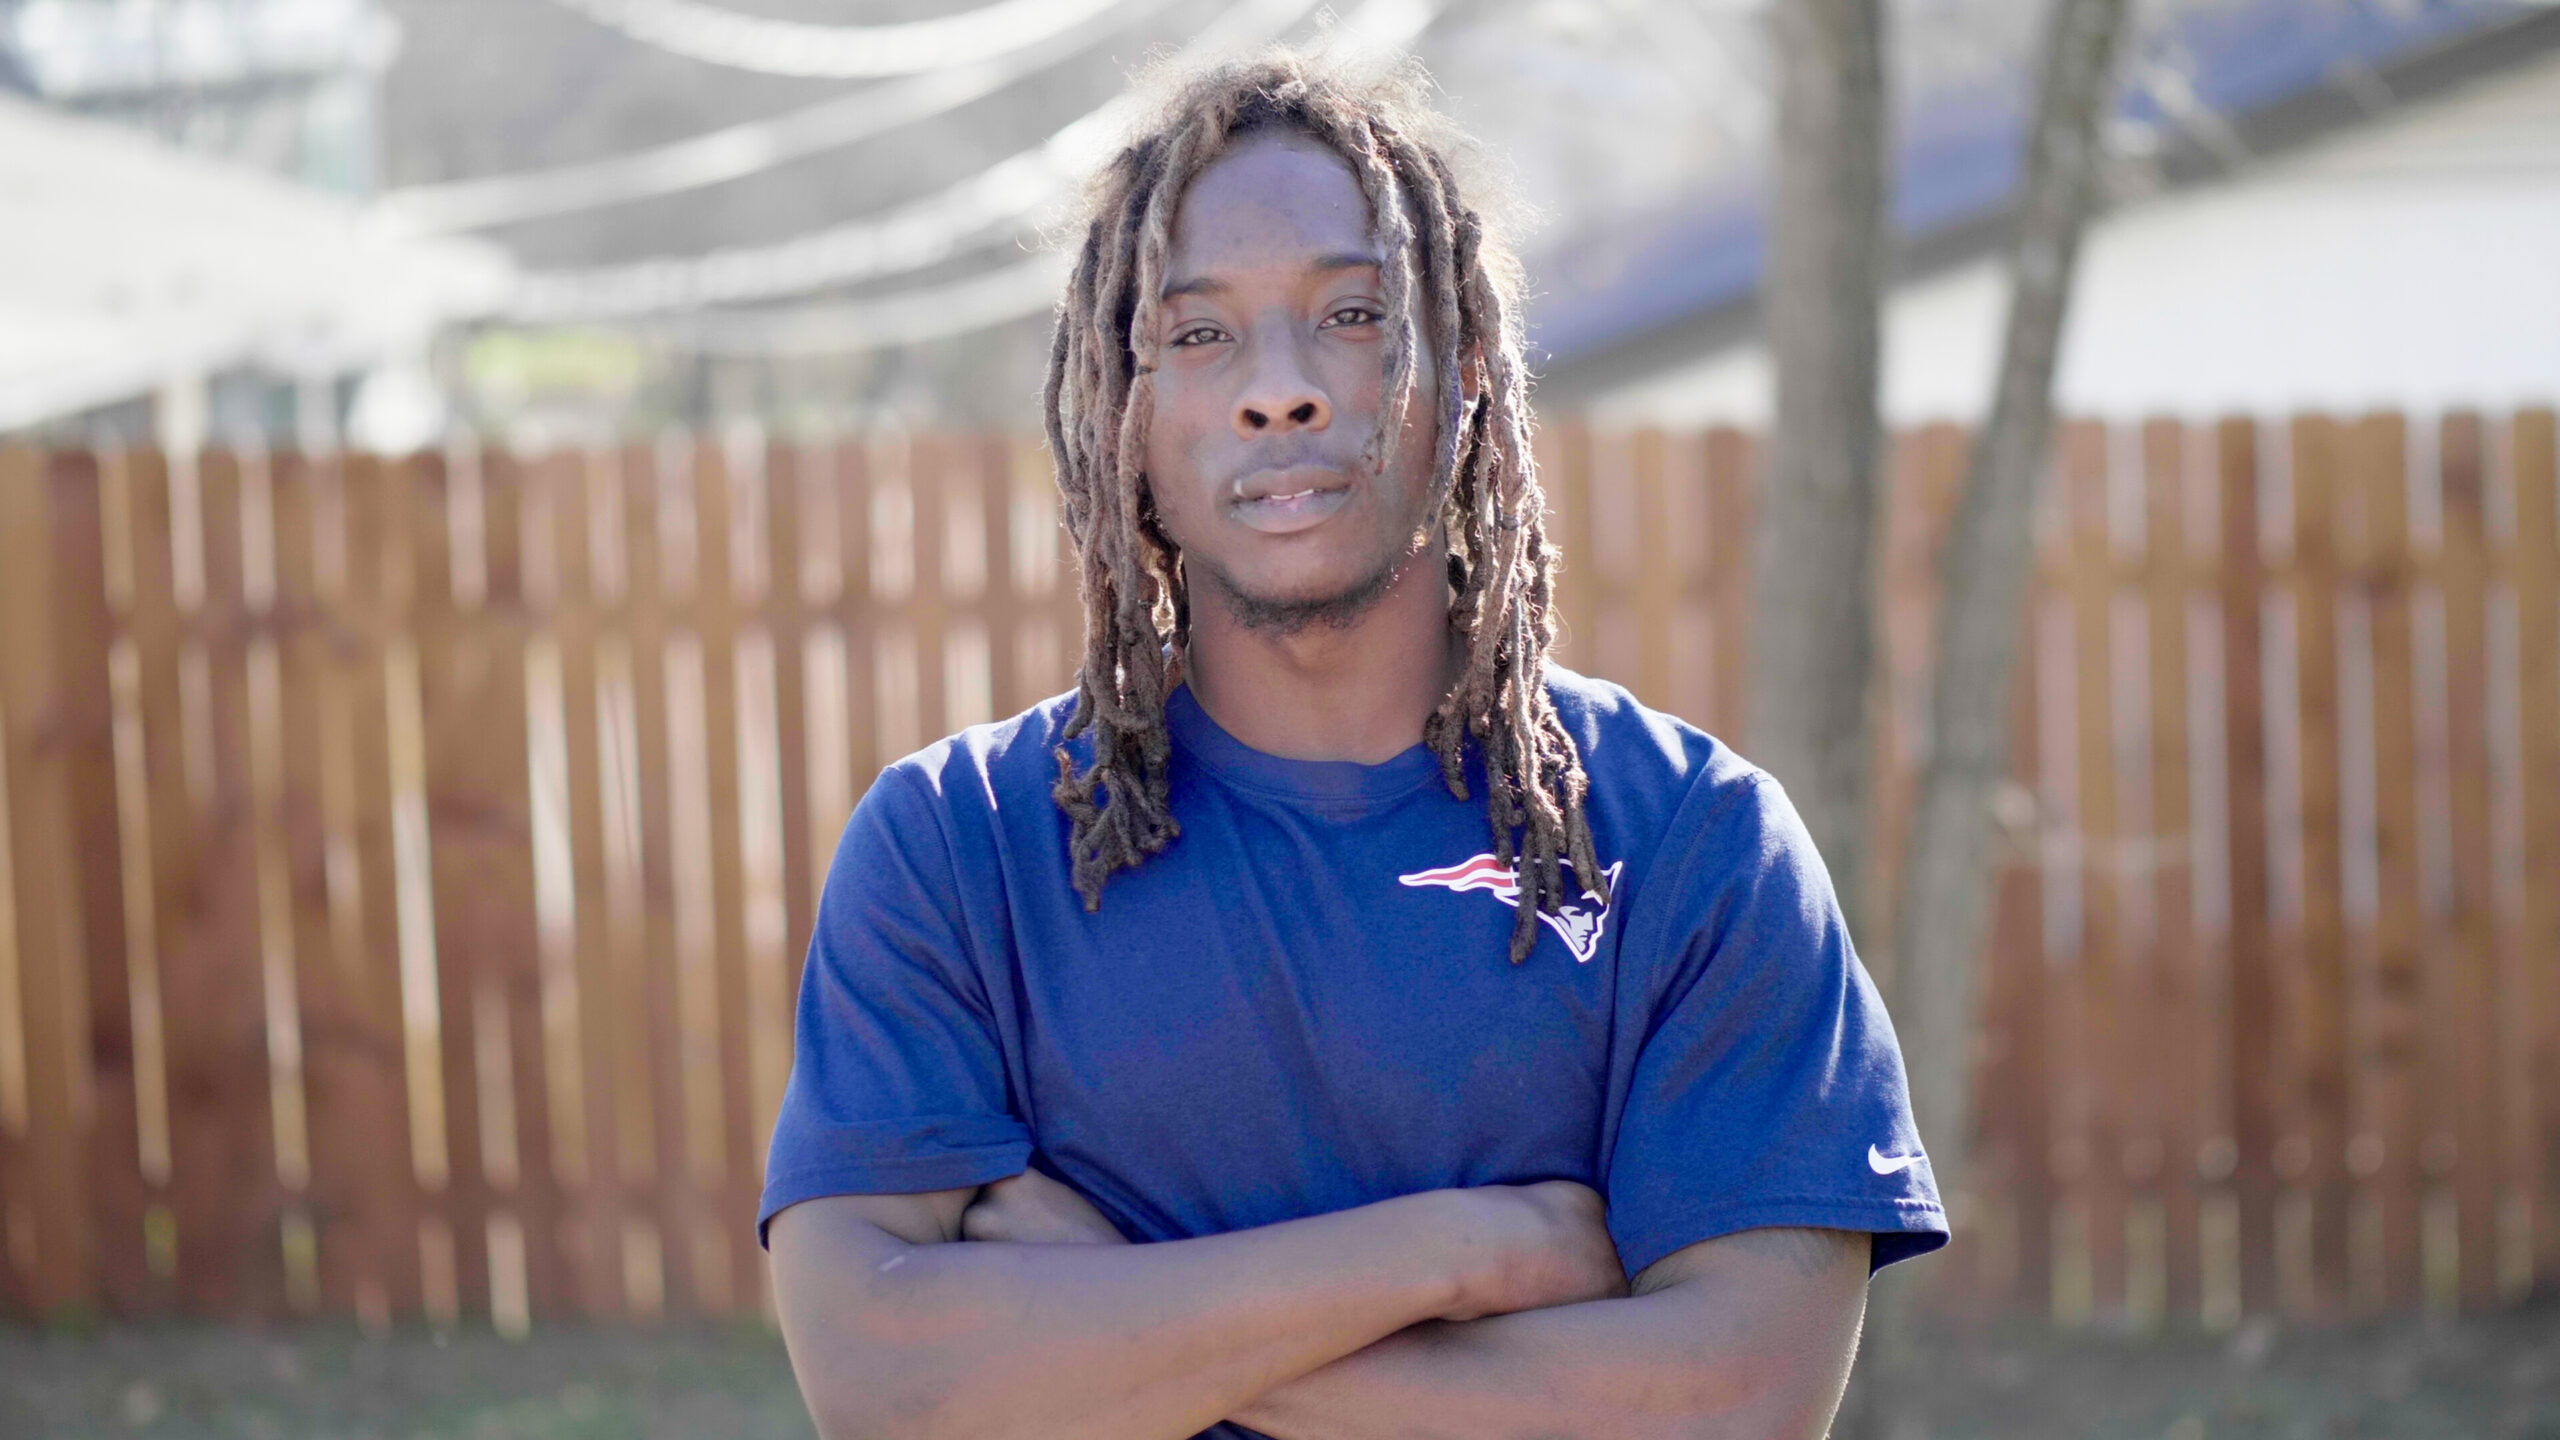 A man with dreadlocks standing in front of a fence with arms across his chest